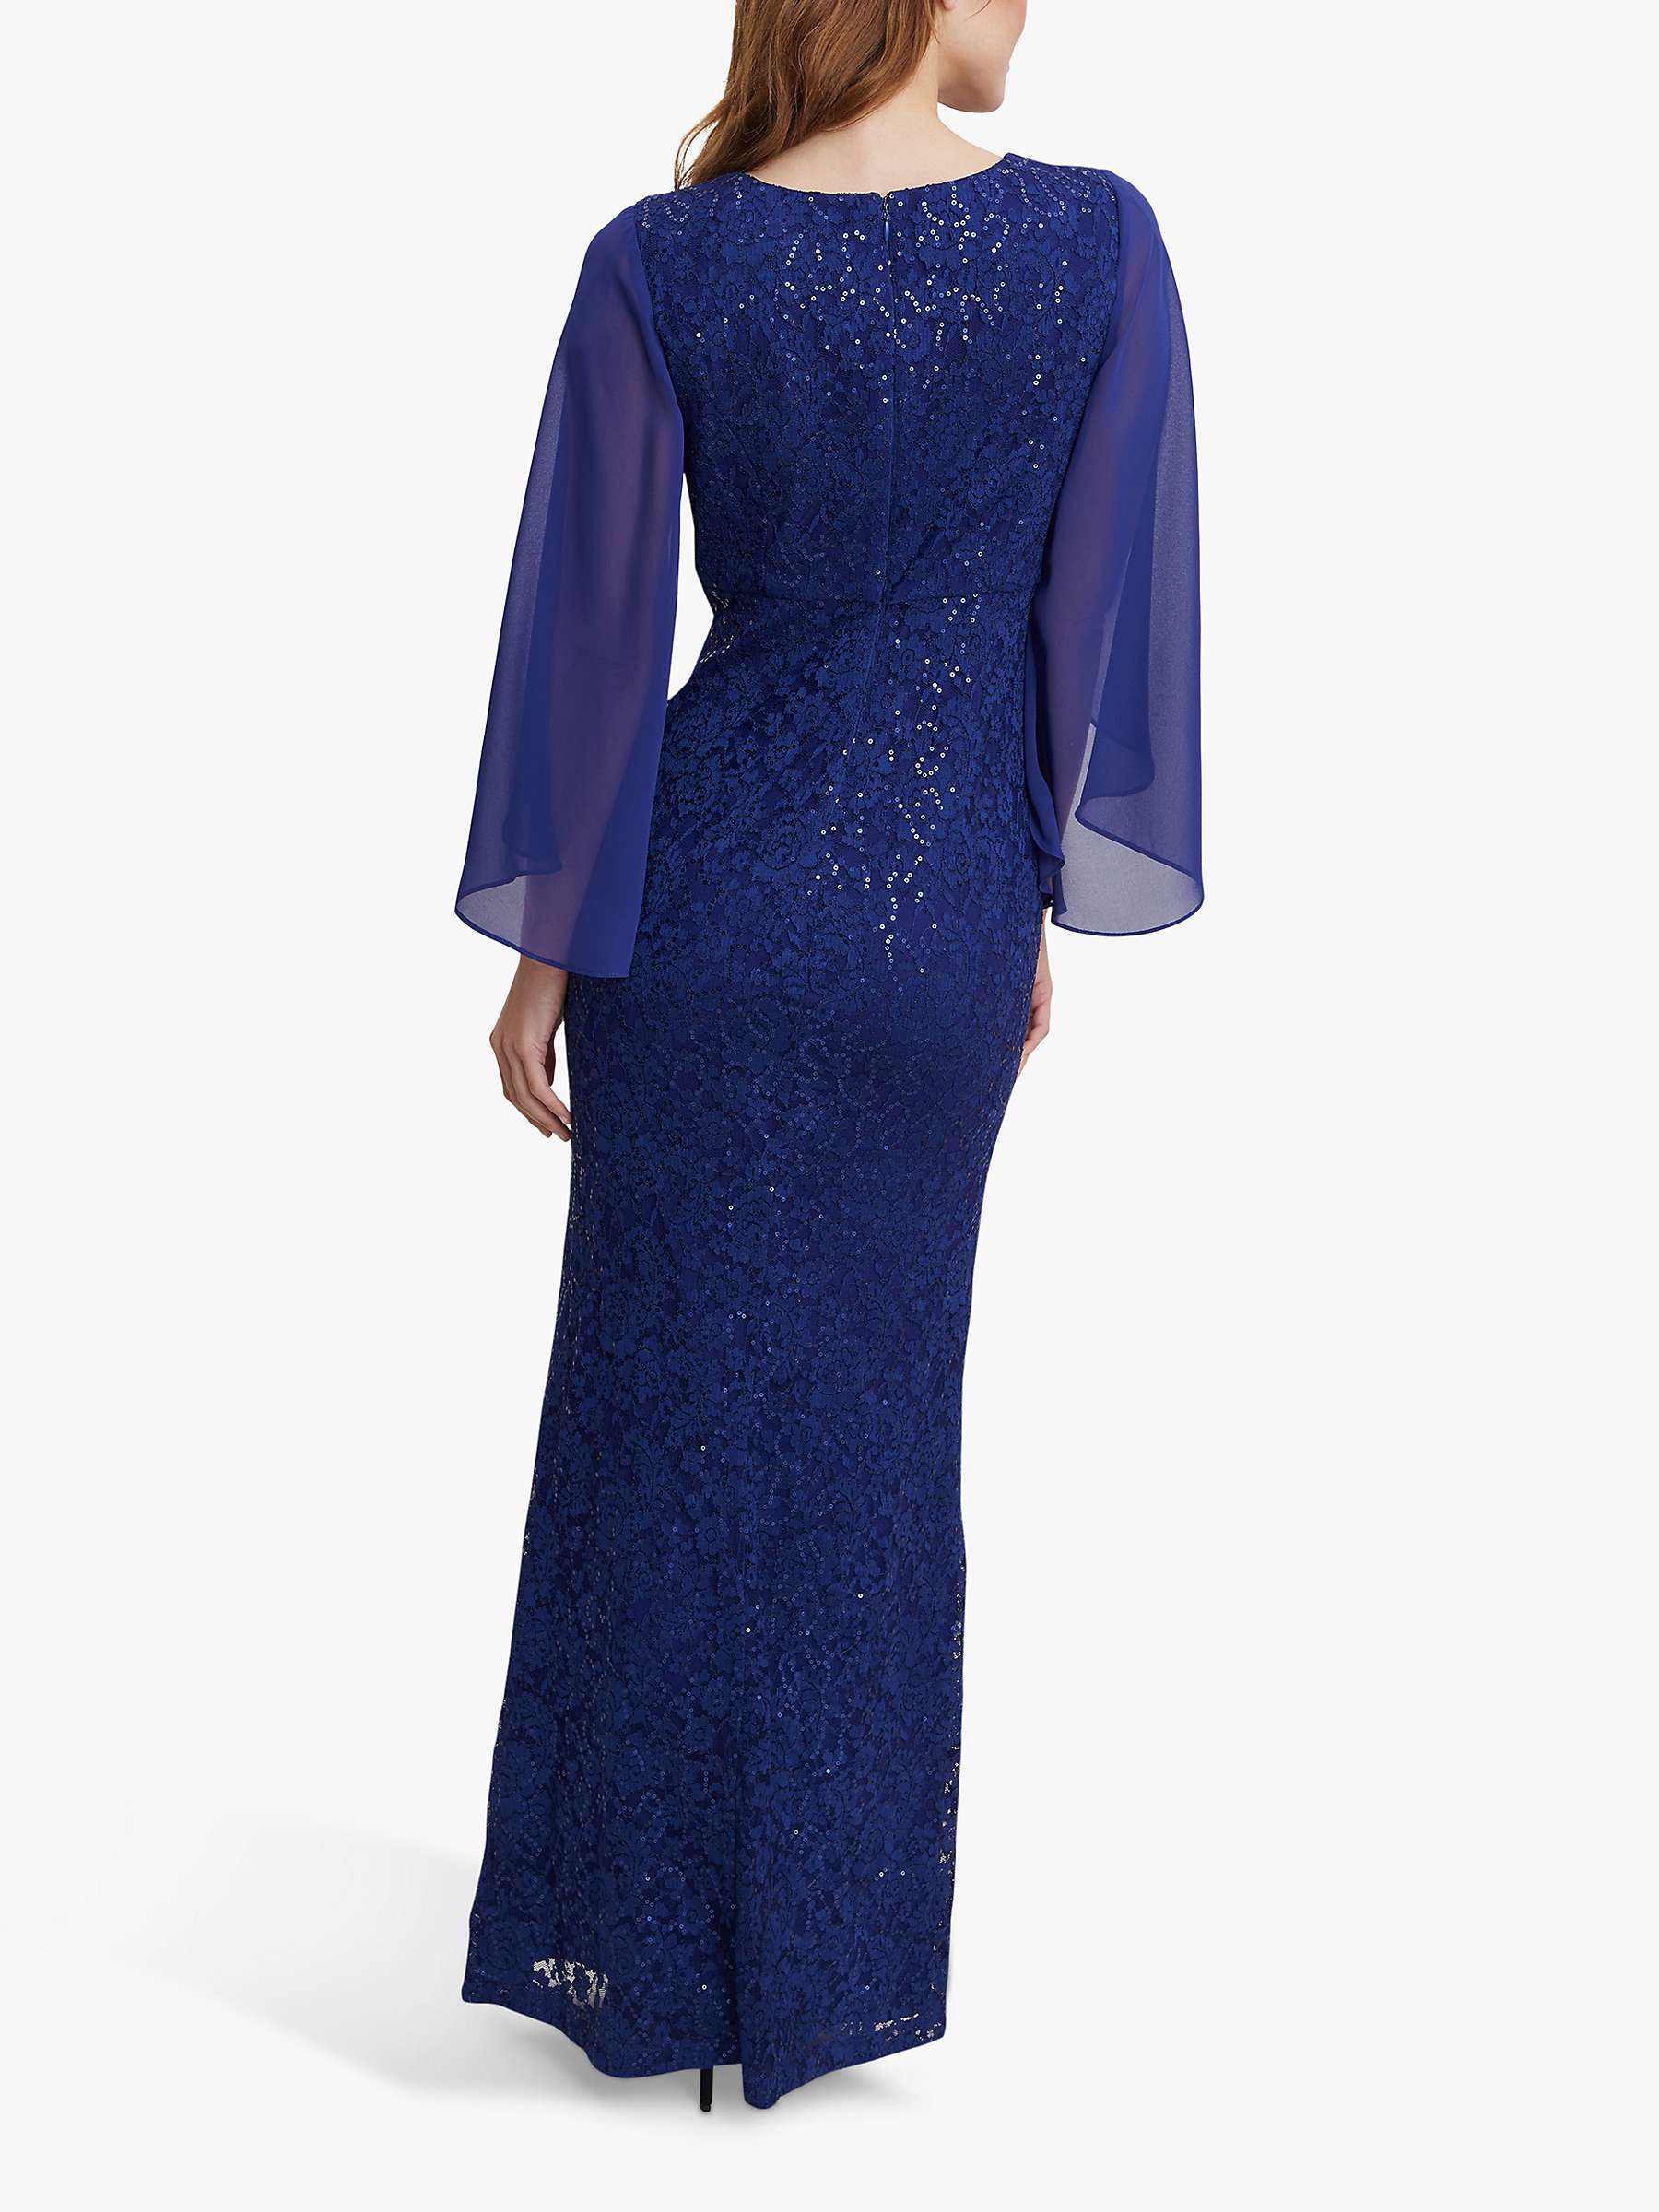 Buy Gina Bacconi Claudine Sequin Maxi Dress, Royal Online at johnlewis.com